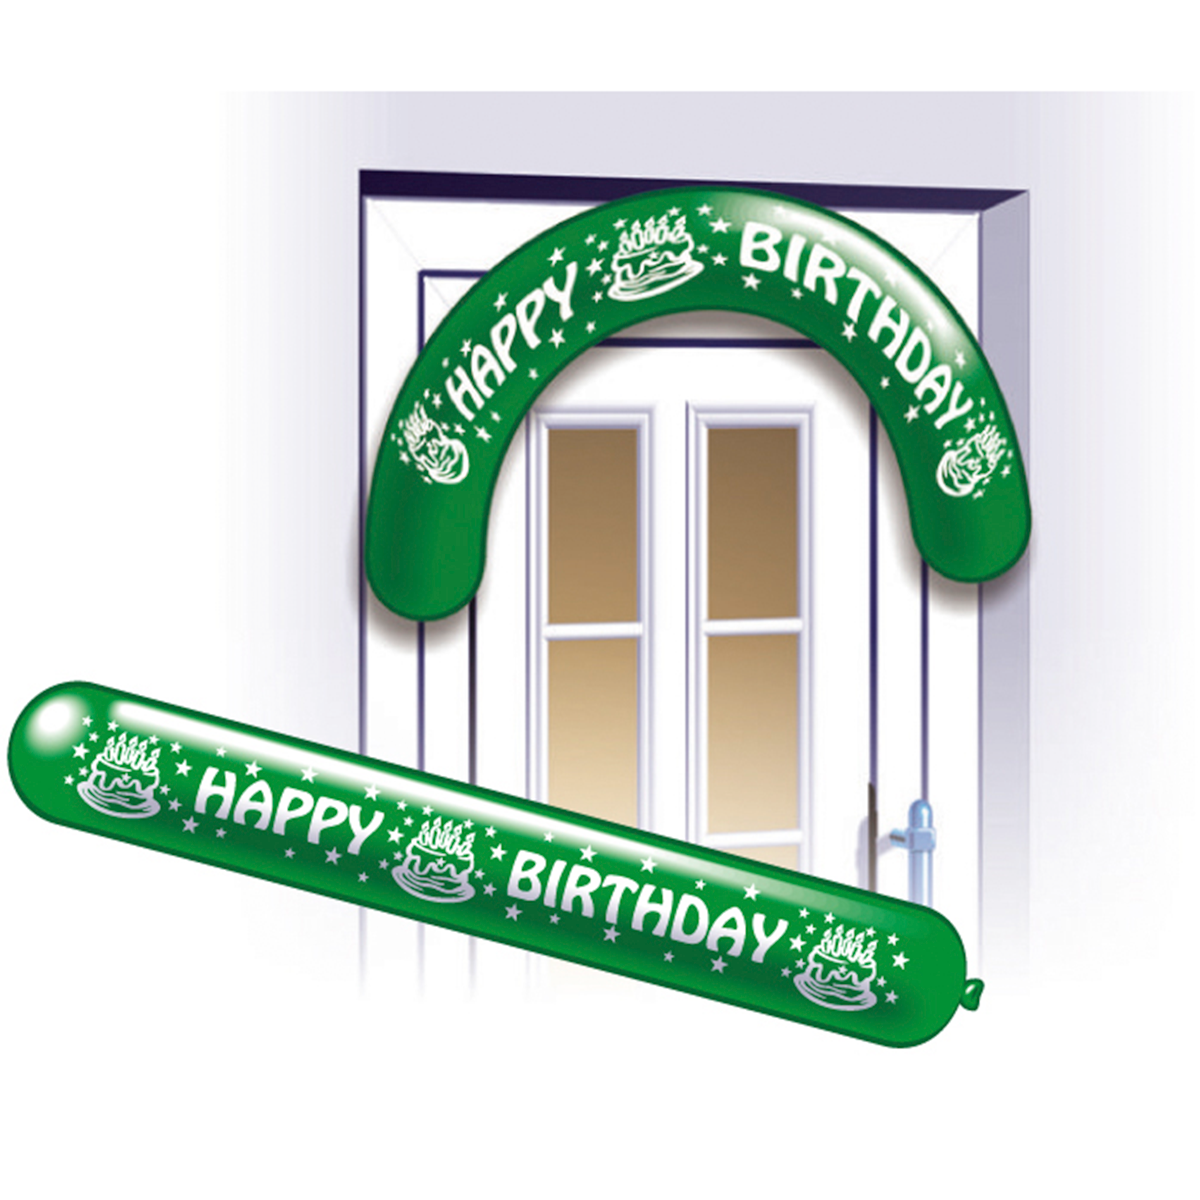 Happy Birthday Balloon Banners 2pcs Balloons & Streamers - Party Centre